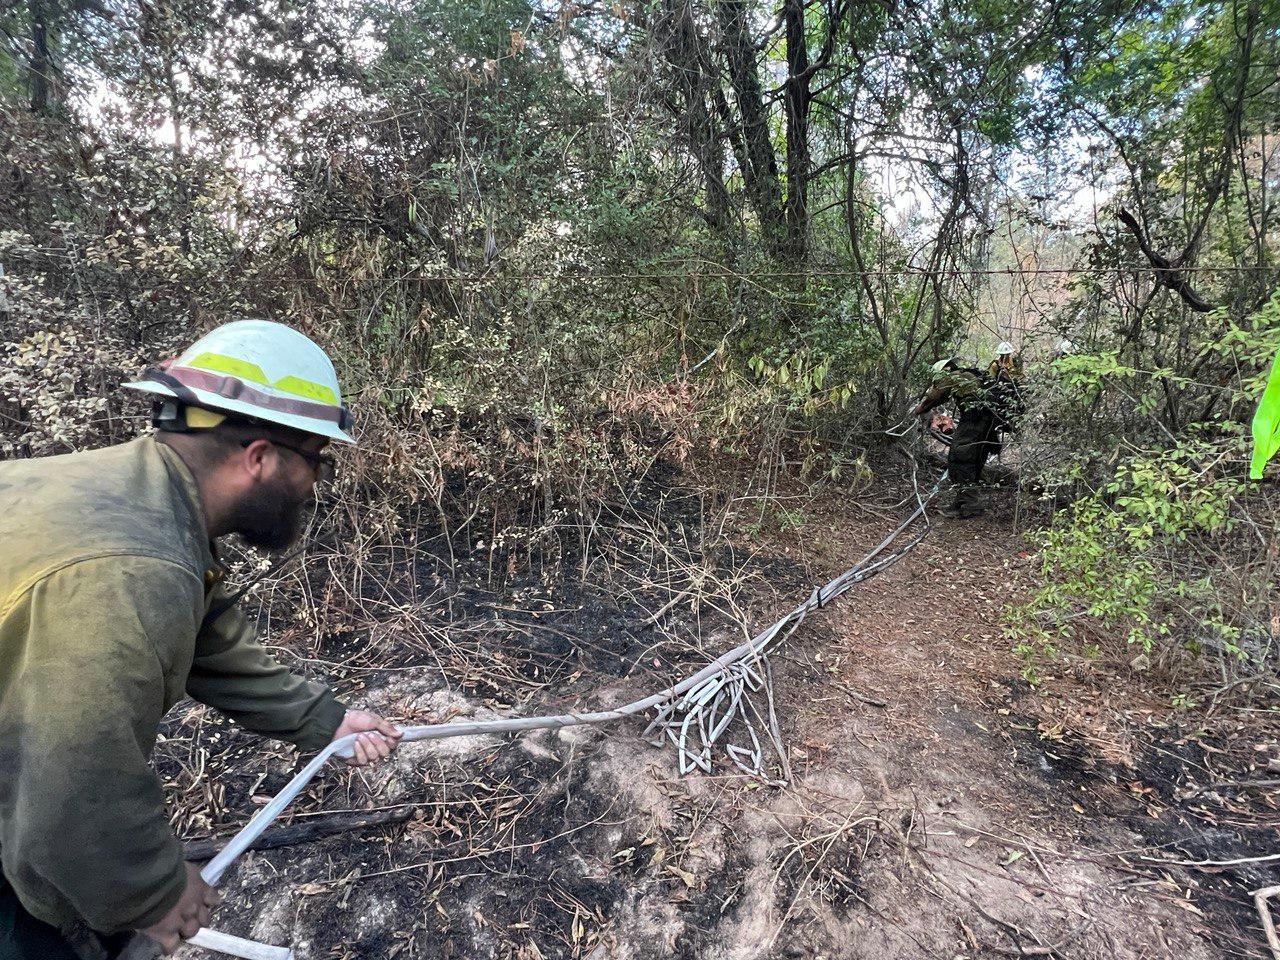 Multiple firefighters pull hose across bare ground to remove it from the forested area and return to the engine for another use.